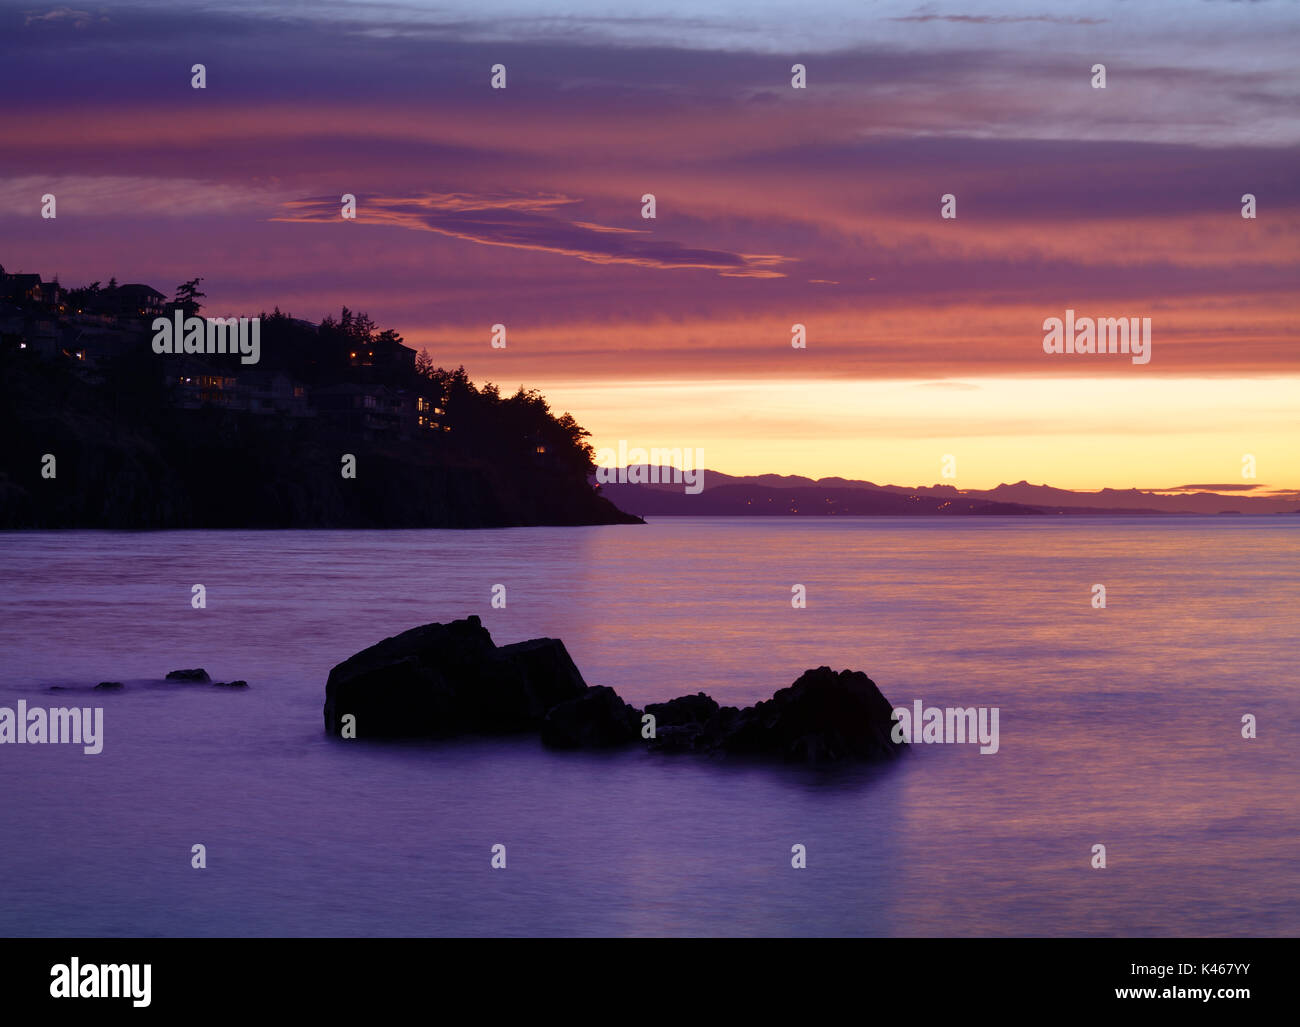 Beautiful dramatic sunset scenery in surreal pink colors on the Pacific ocean coast with lights of residential houses on dark rocky shores in Nanaimo, Stock Photo